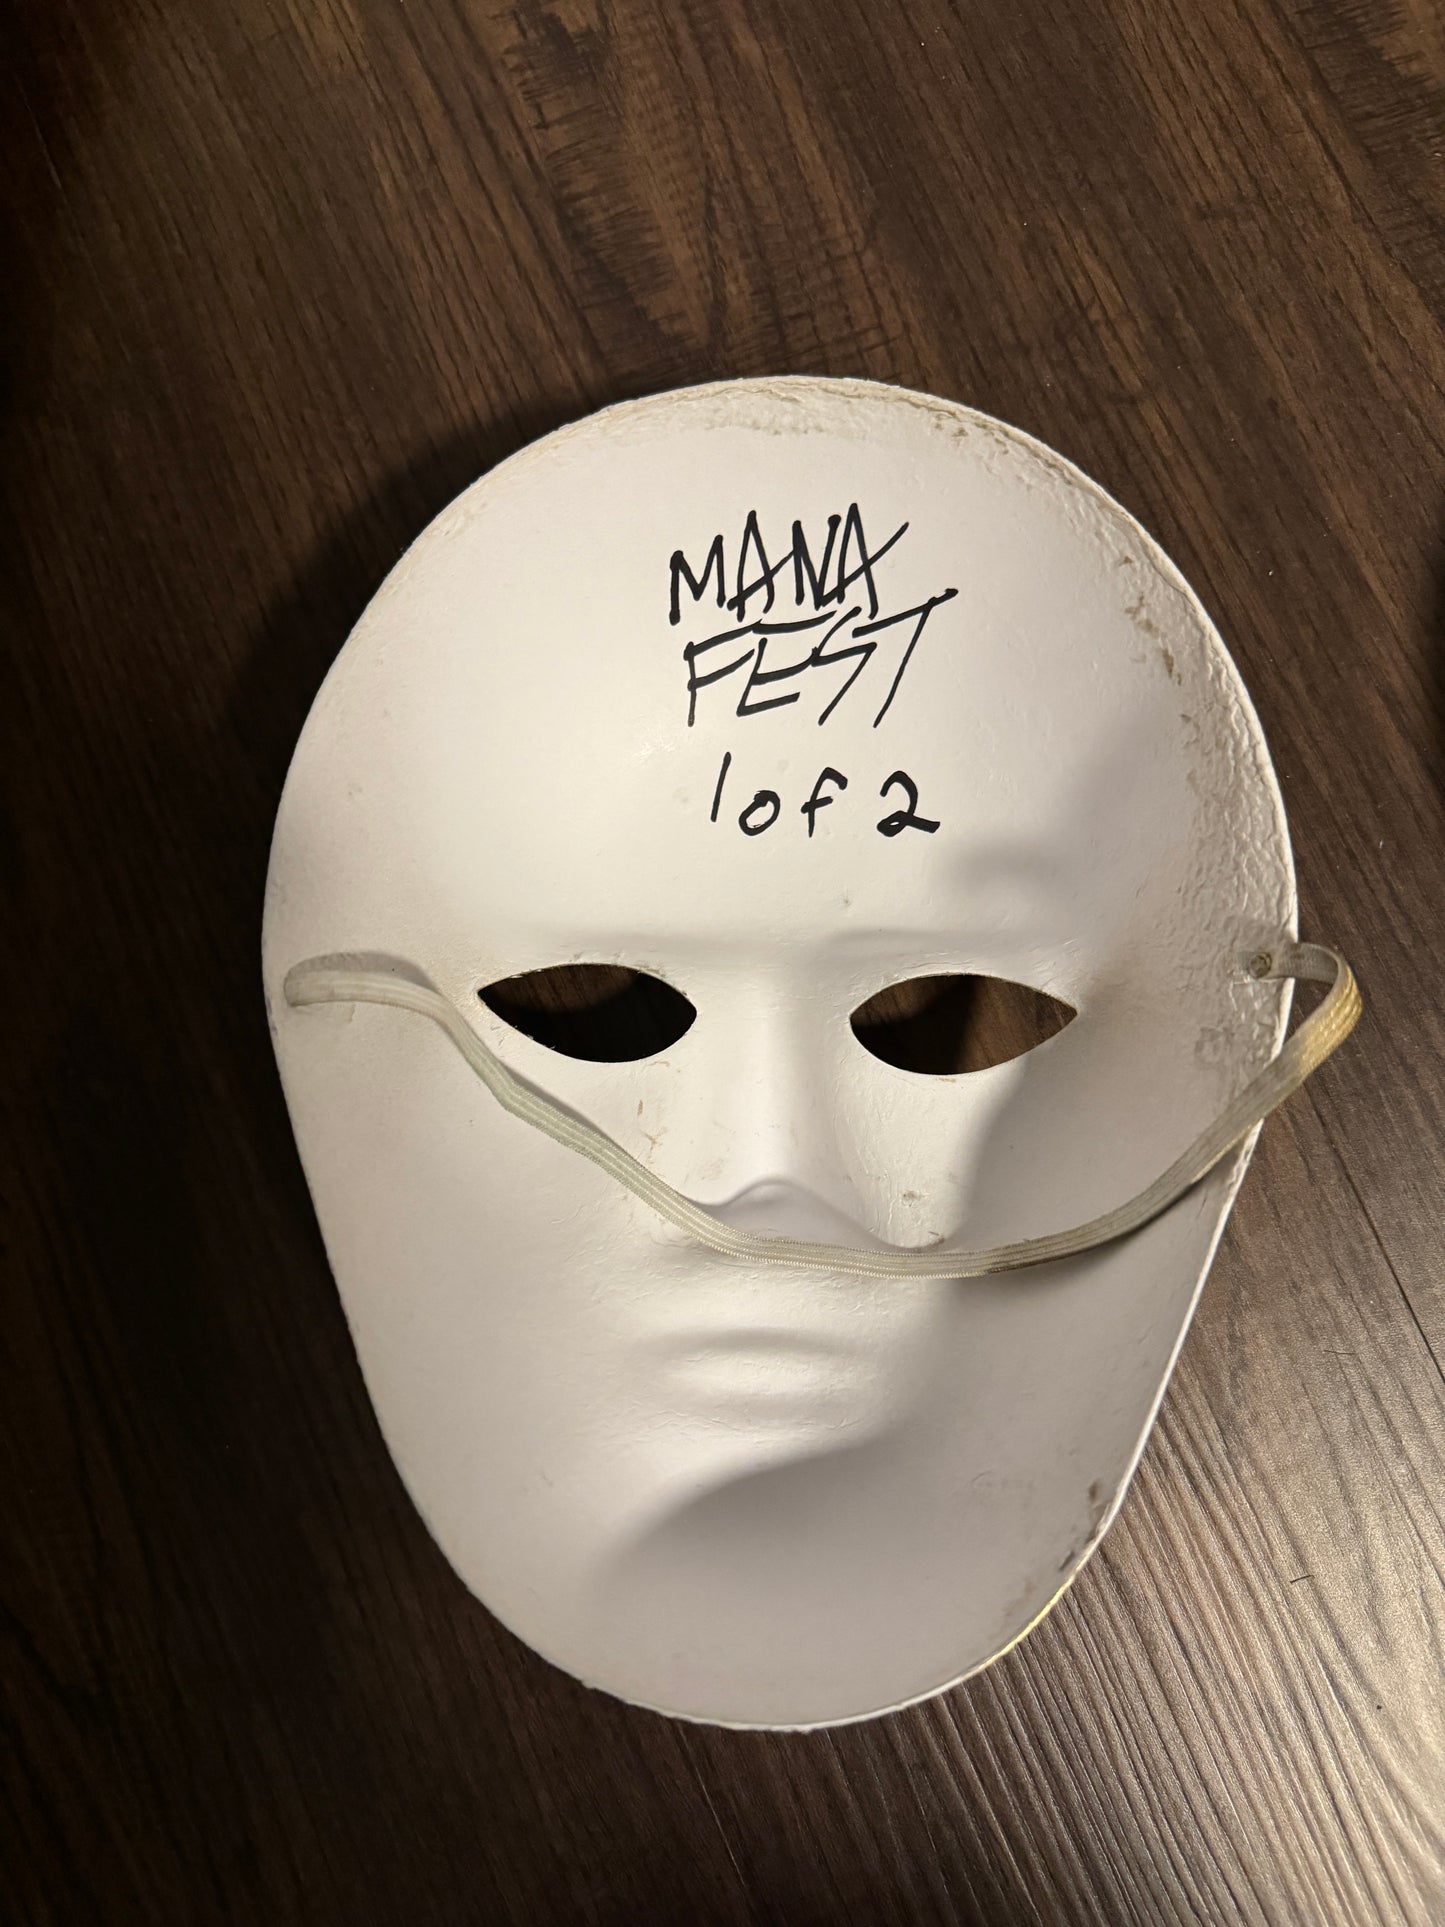 Autographed Gold painted Masks (Cleanin Out My Closet Music Video)